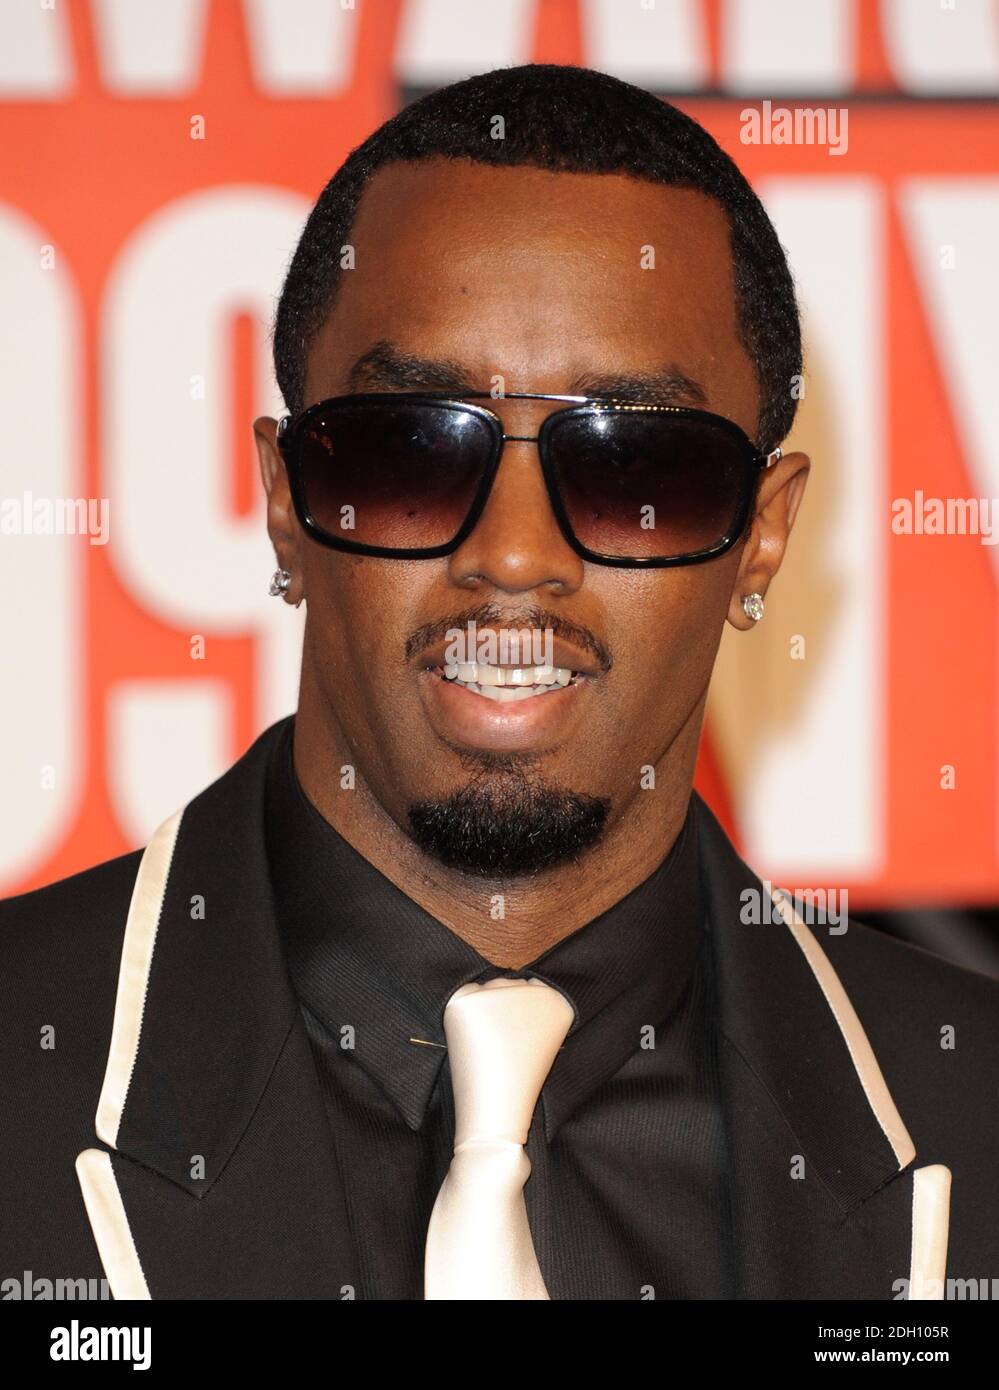 P diddy hi-res stock photography and images - Alamy